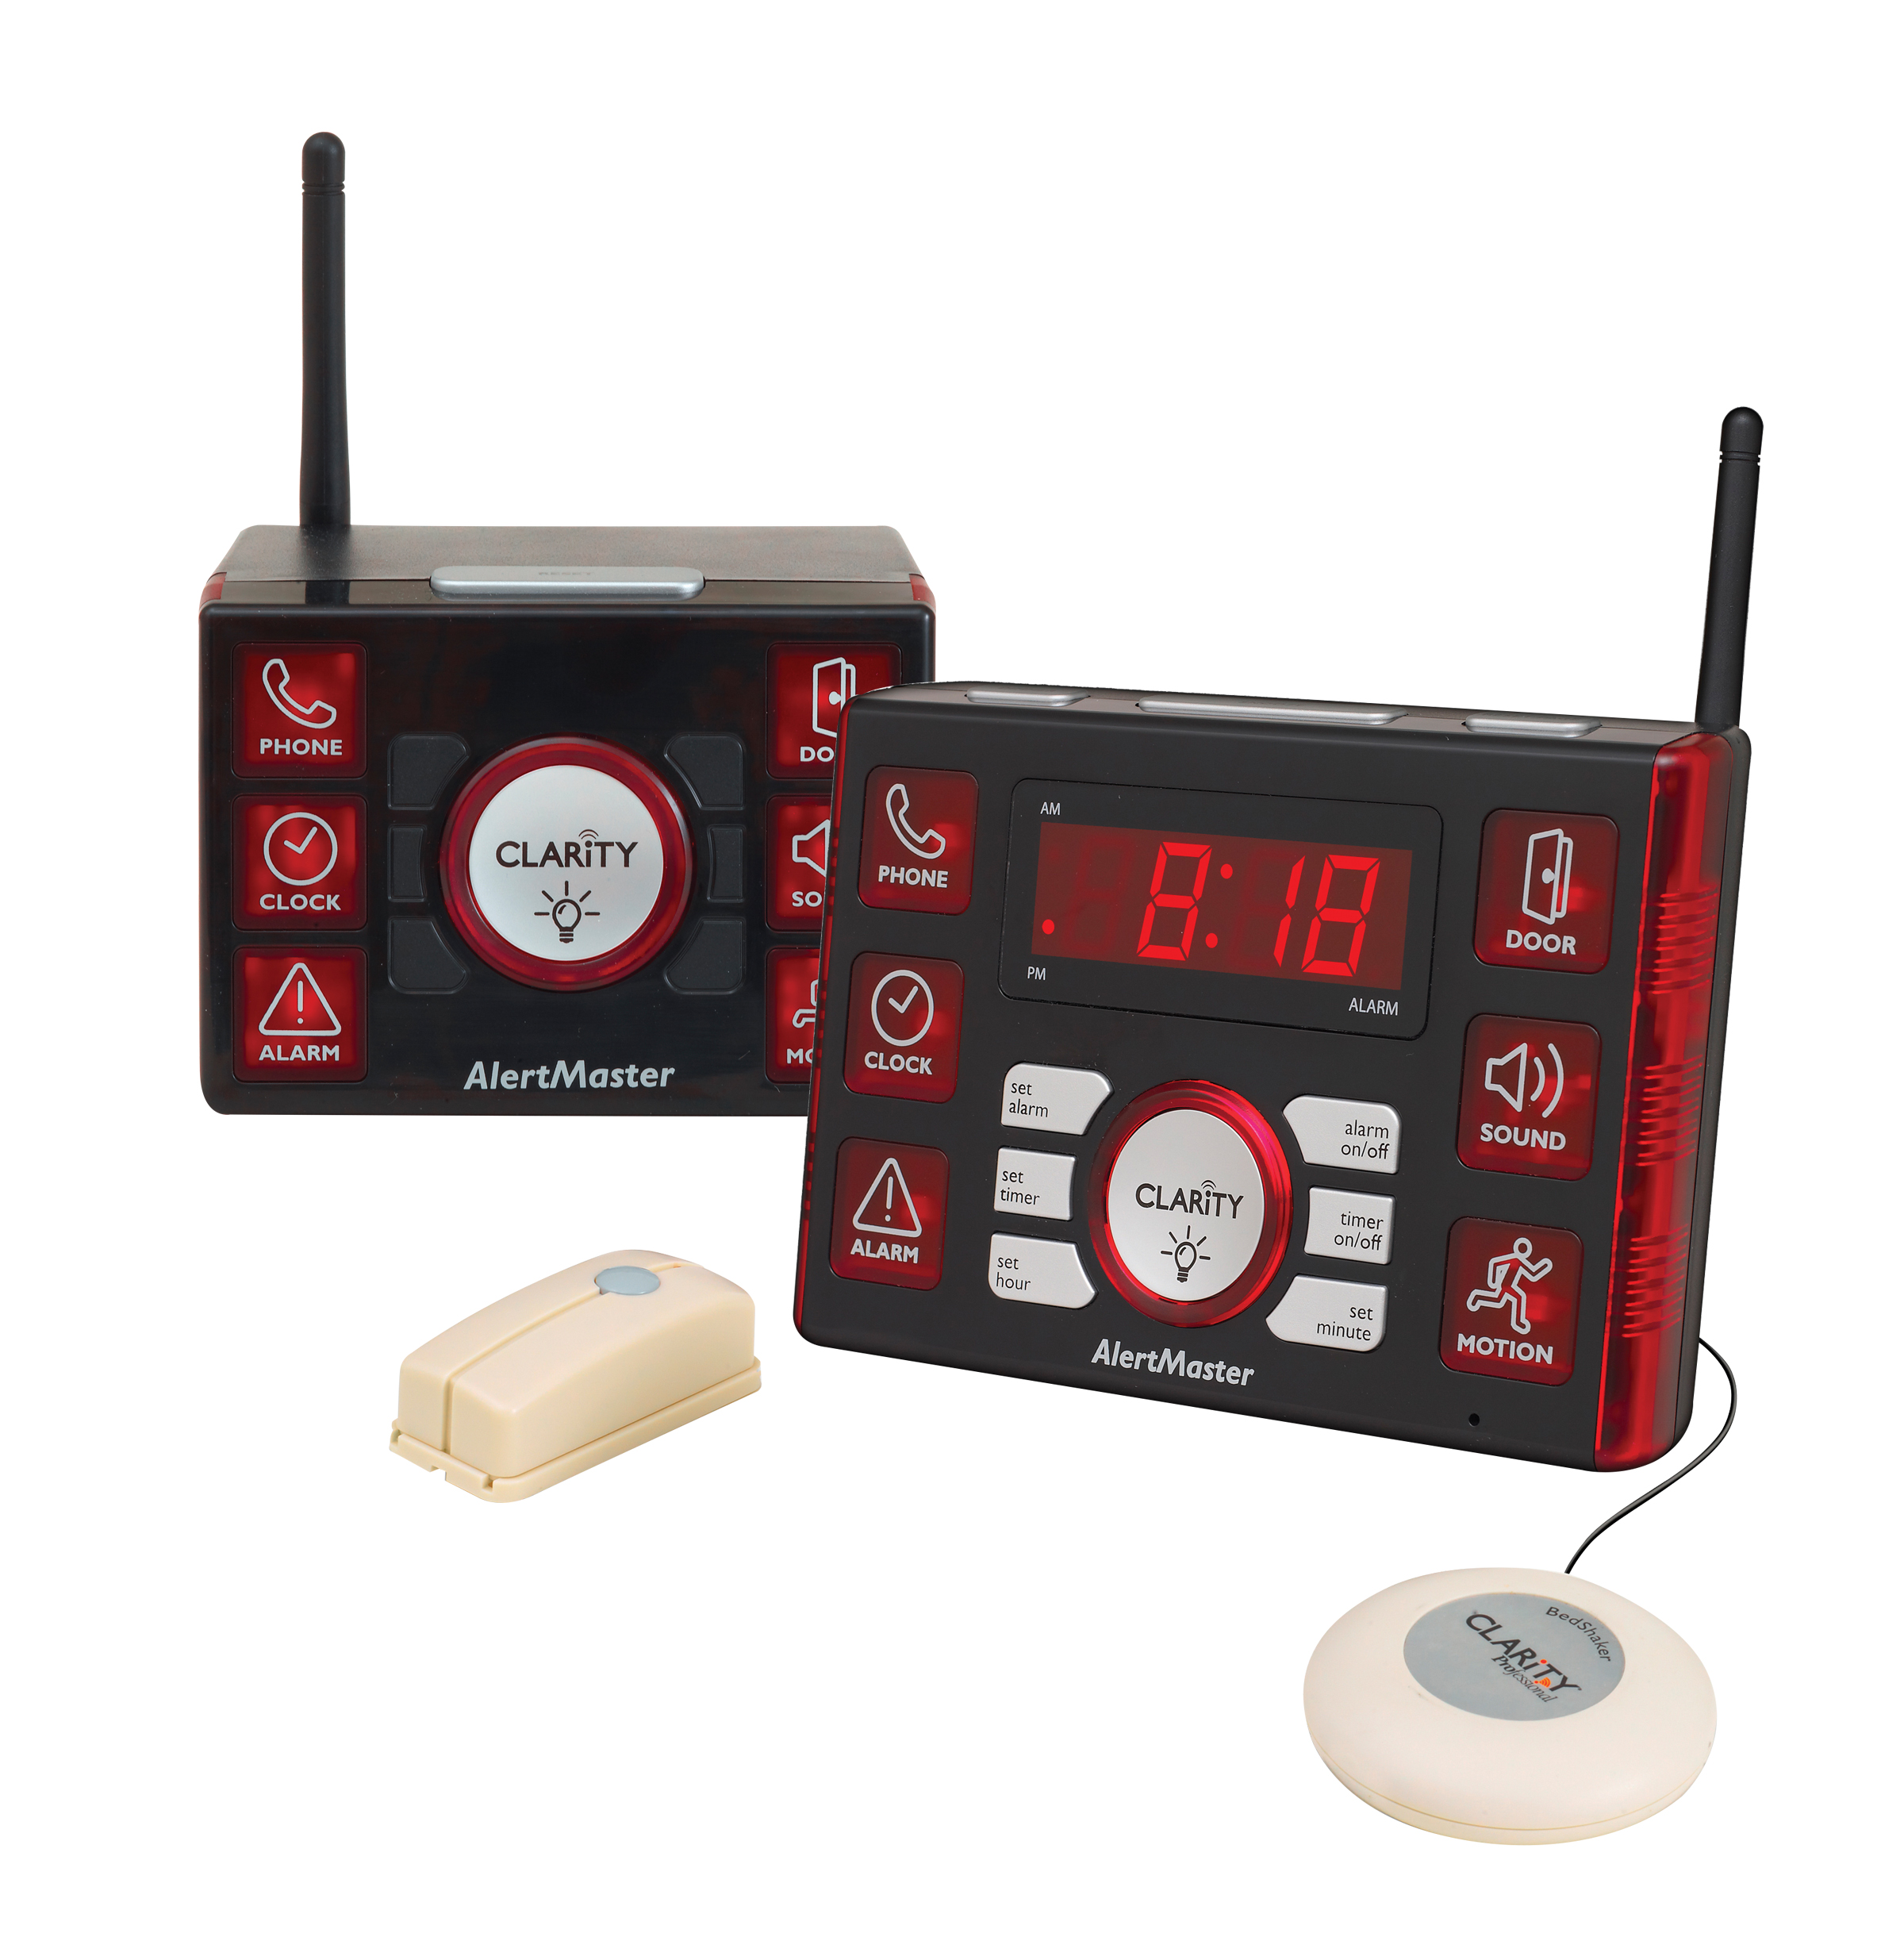 The Clarity AlertMaster® AL10™ Notification System notifies you to the door and phone/VP calls in up to two rooms. It also functions as an alarm clock through a bed shaker and plugged in lamp.